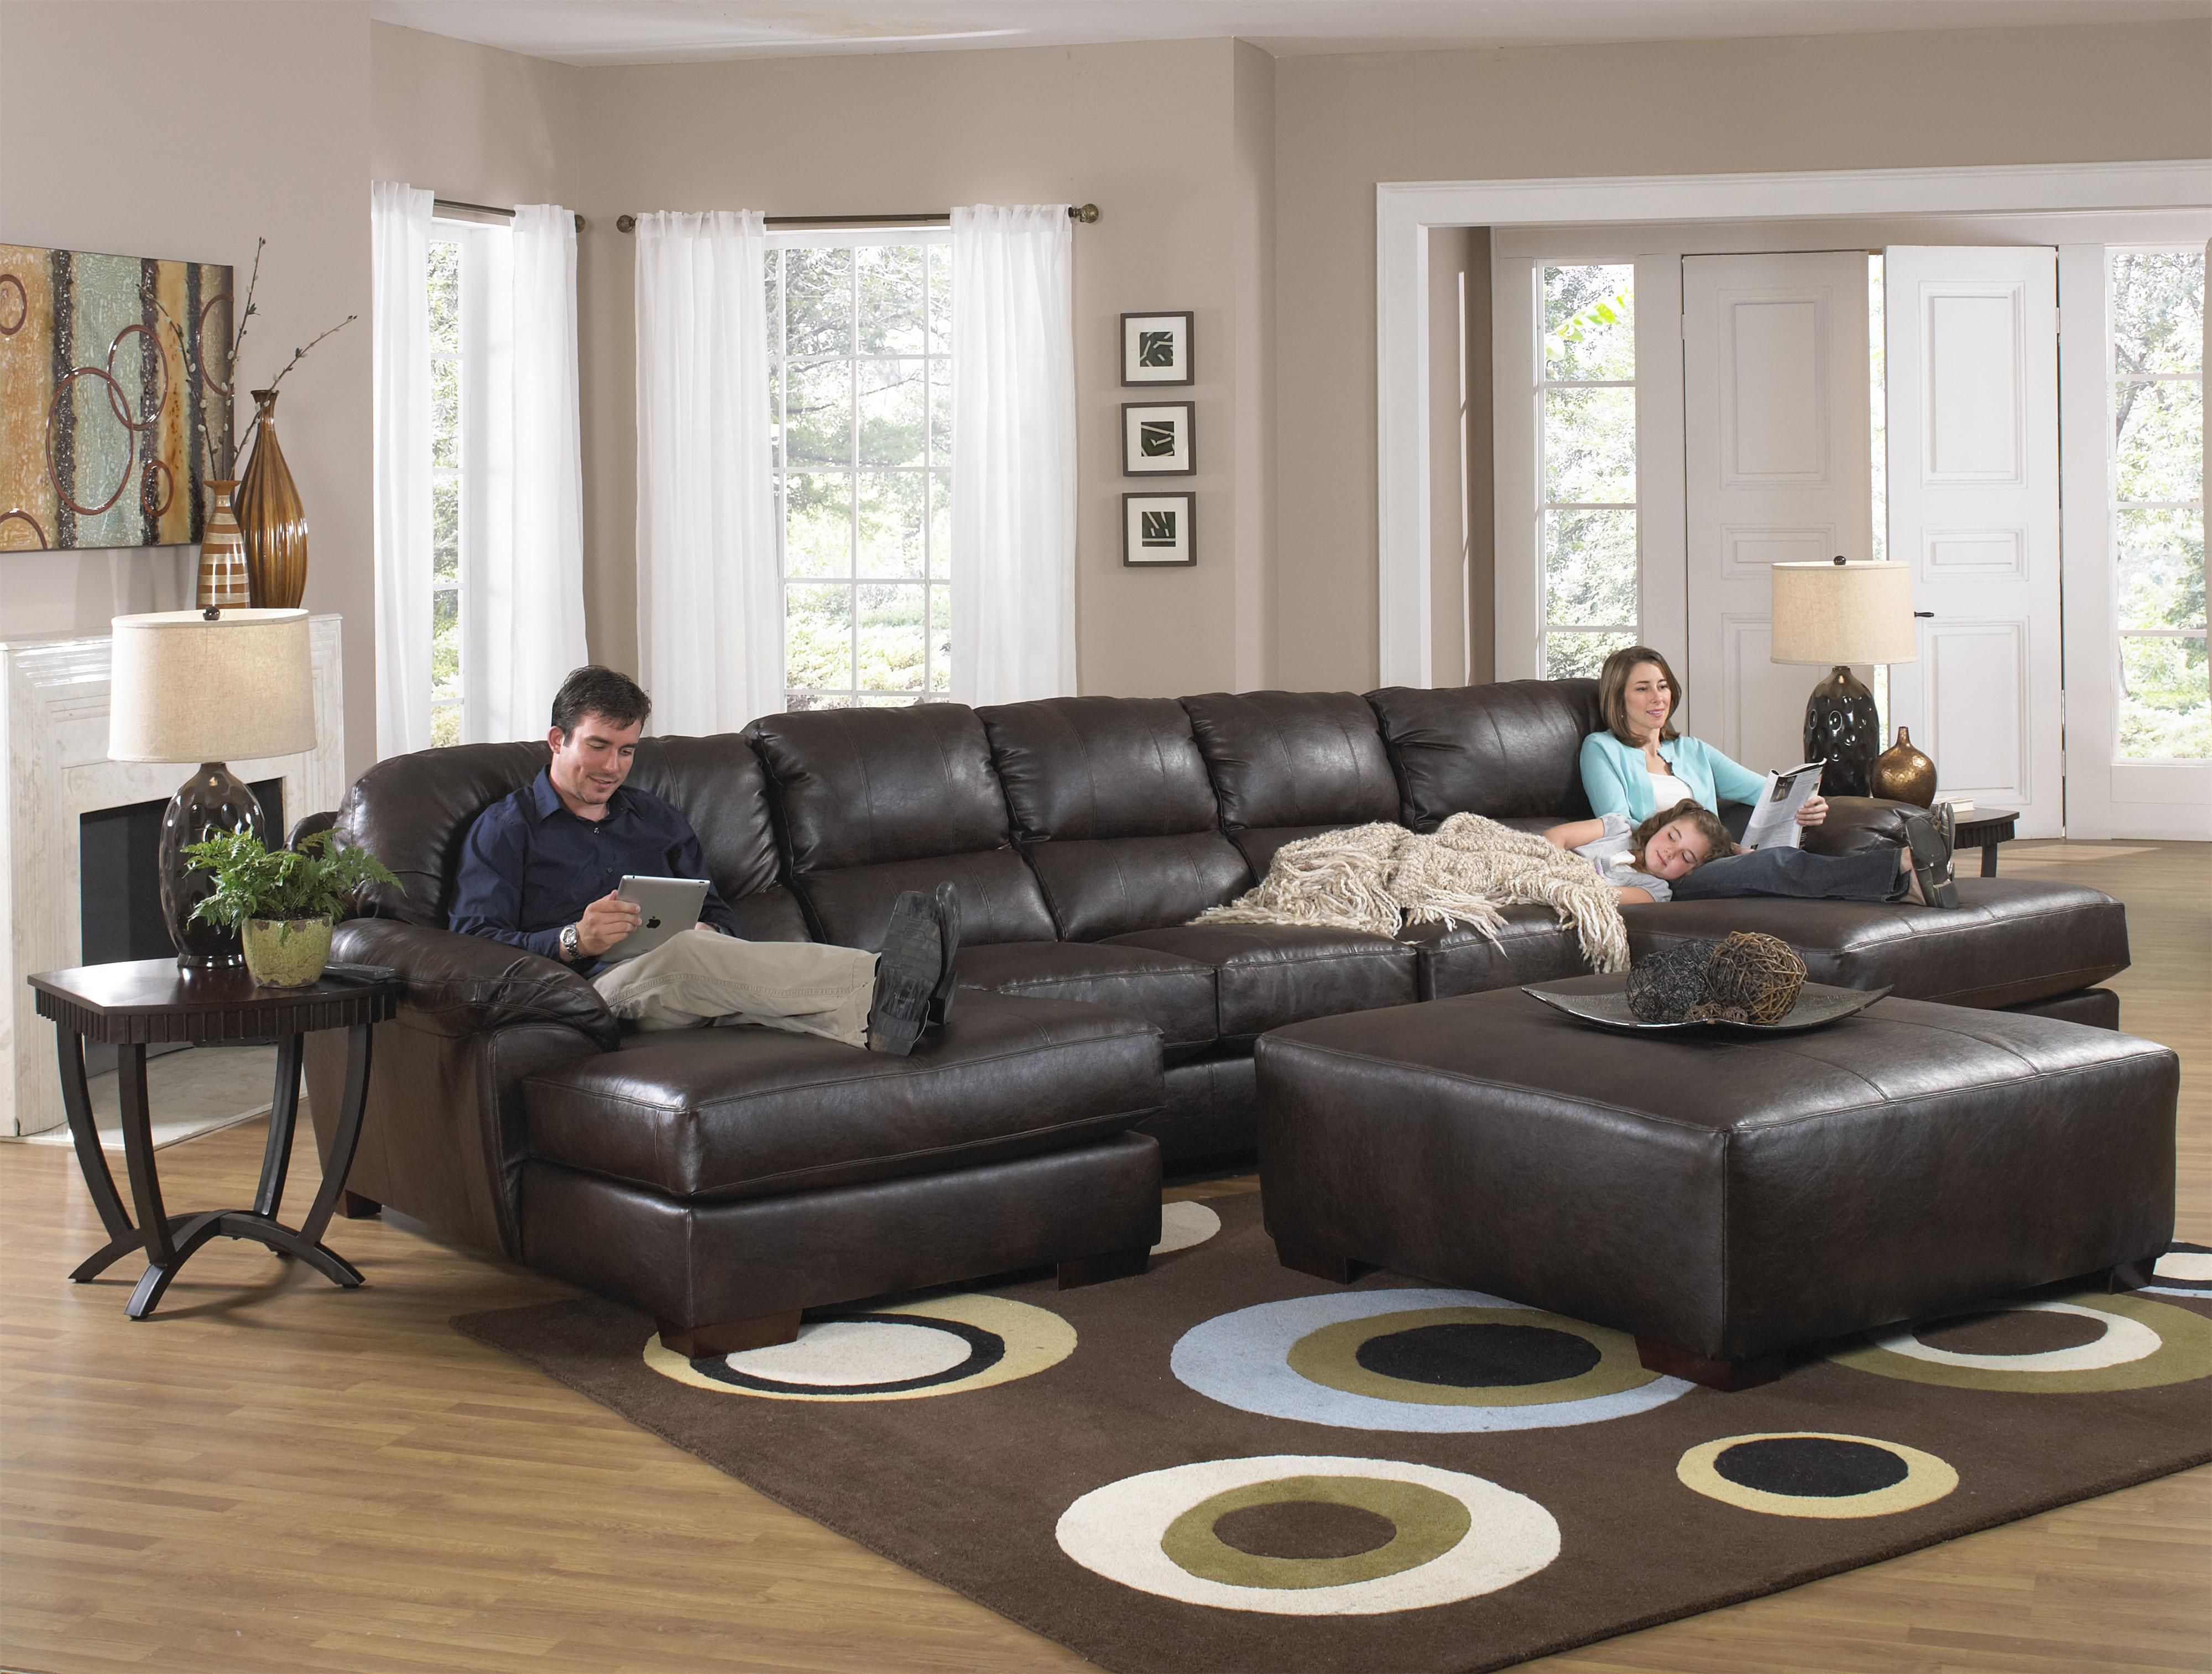 Jackson Furniture Lawson Two Chaise Sectional Sofa With Five Total Pertaining To Famous Jackson 6 Piece Power Reclining Sectionals (View 12 of 20)